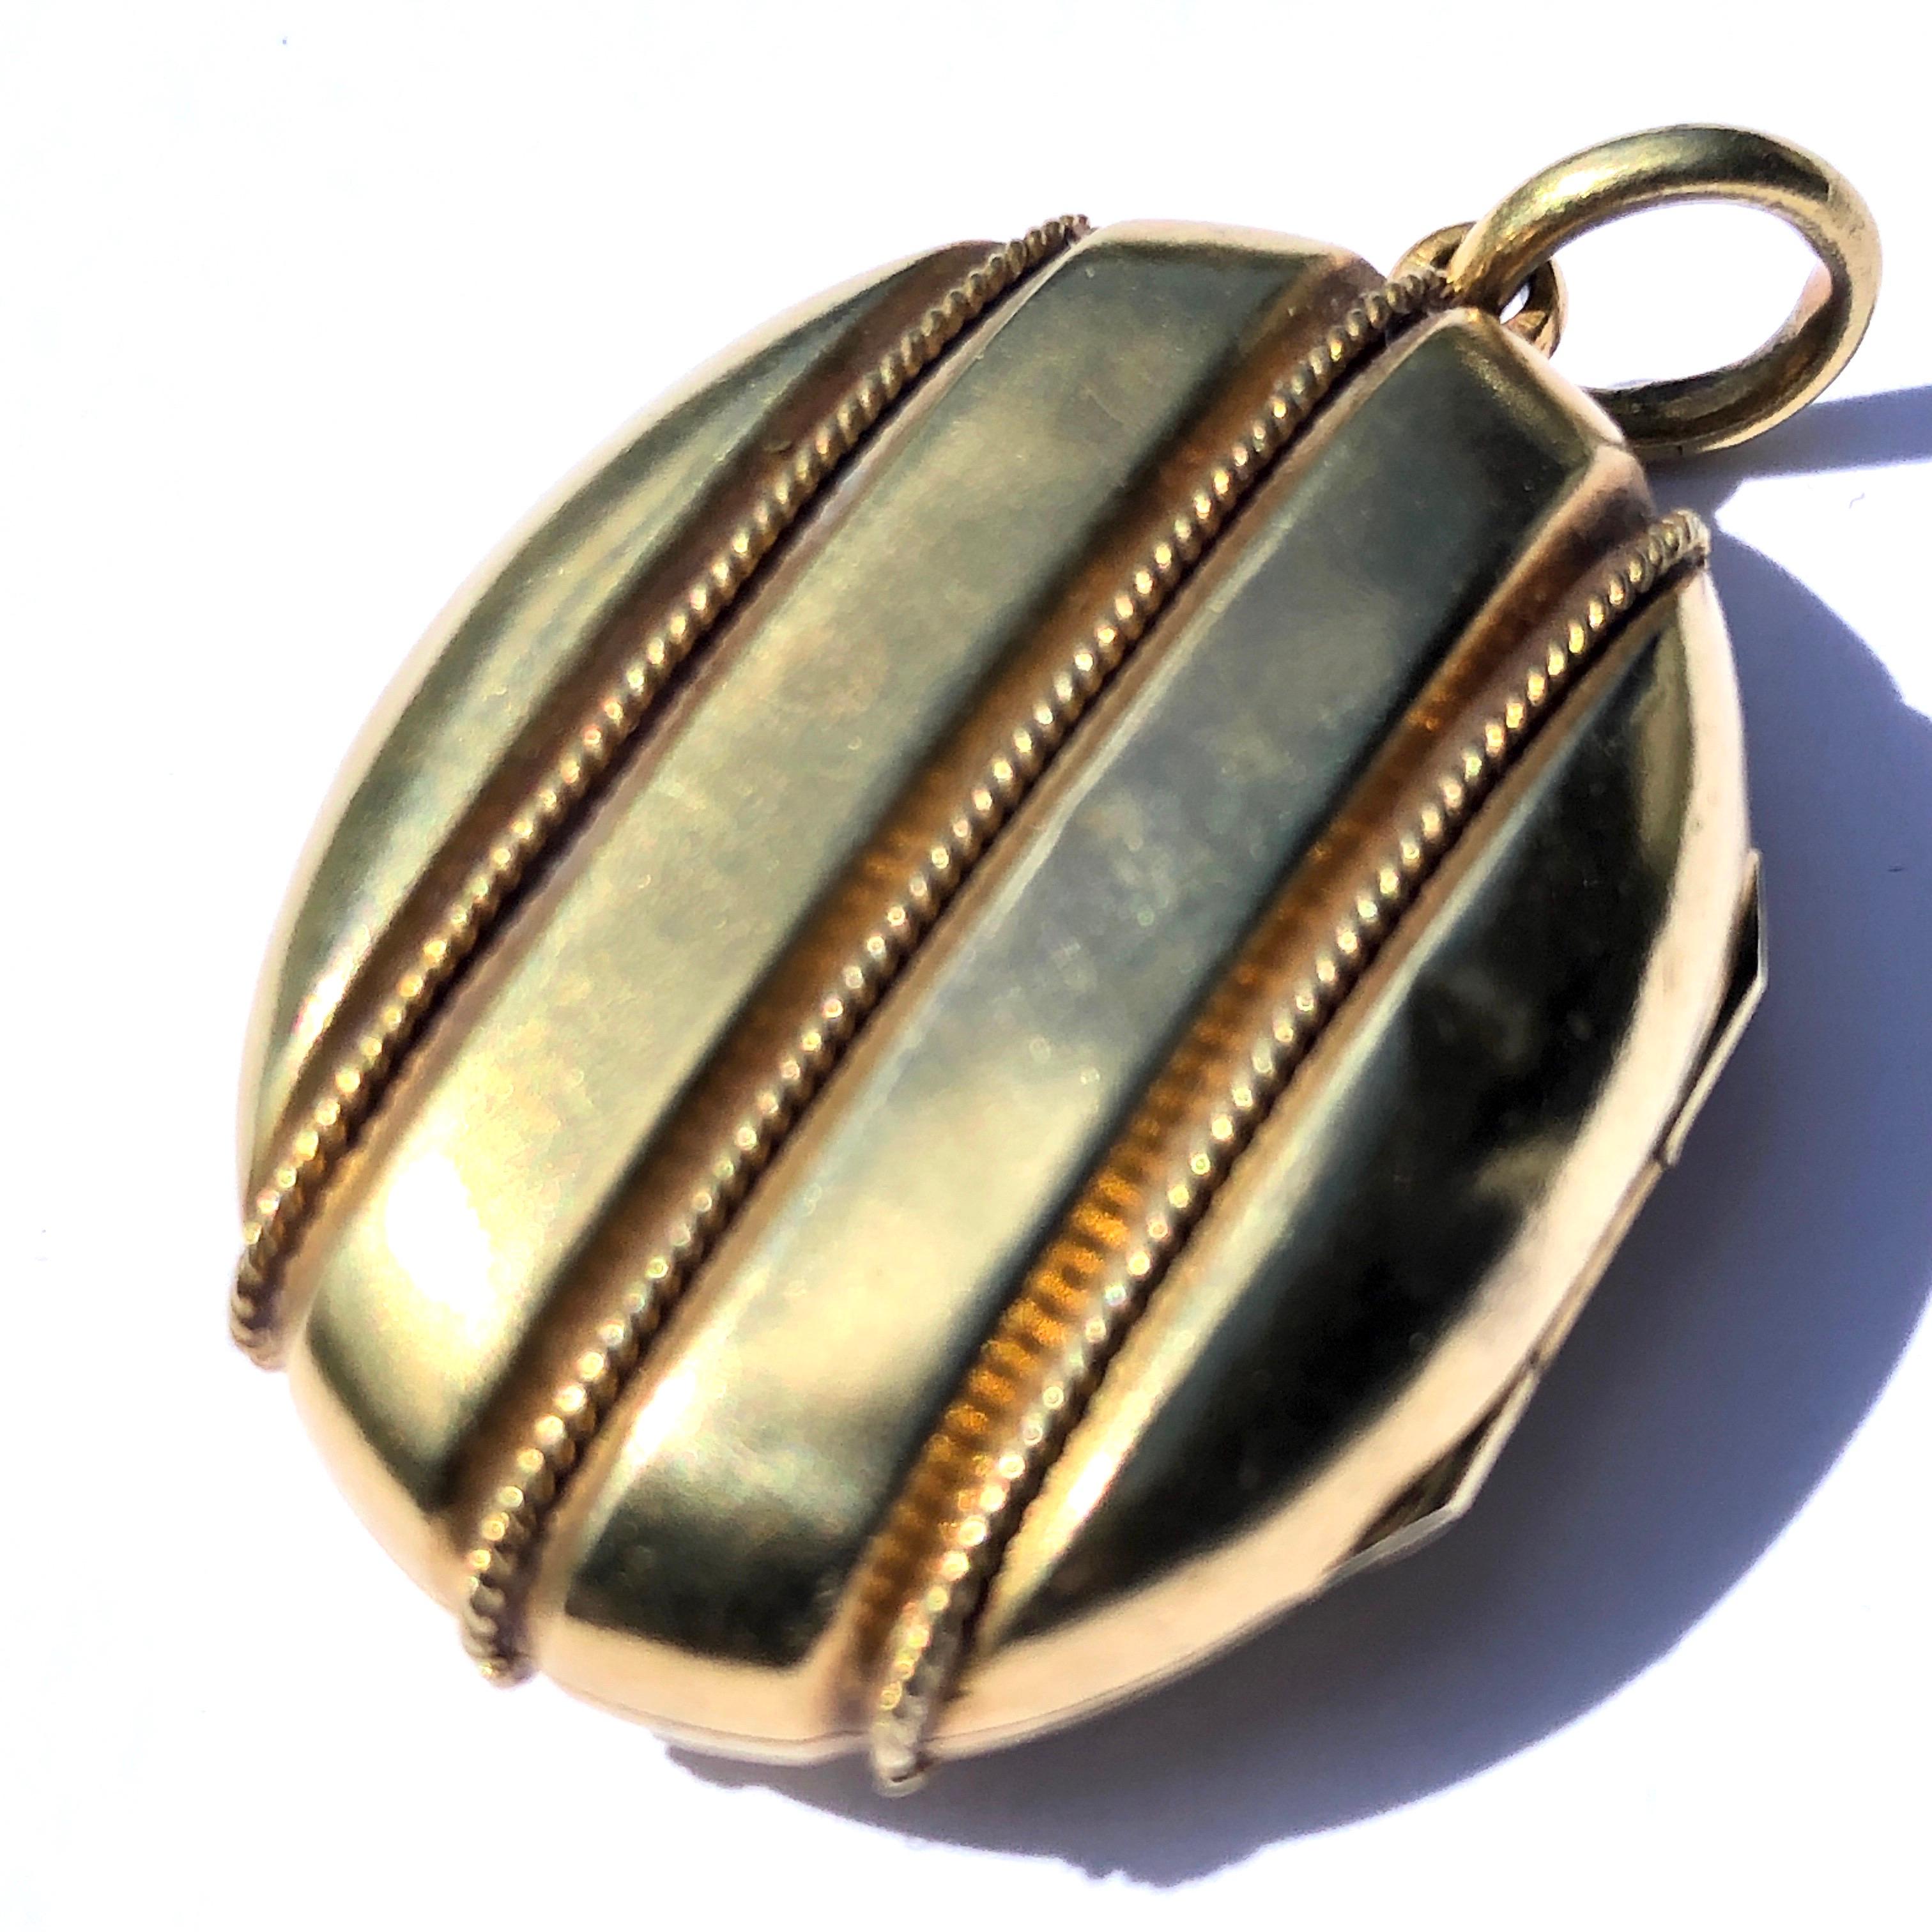 This glossy 15ct gold locket has delicate rope twist detail that carries on right the way around the locket. On the inside there is a colour portrait of a sweet girl. 

Top To Bottom: 40mm

Weight: 7.6g